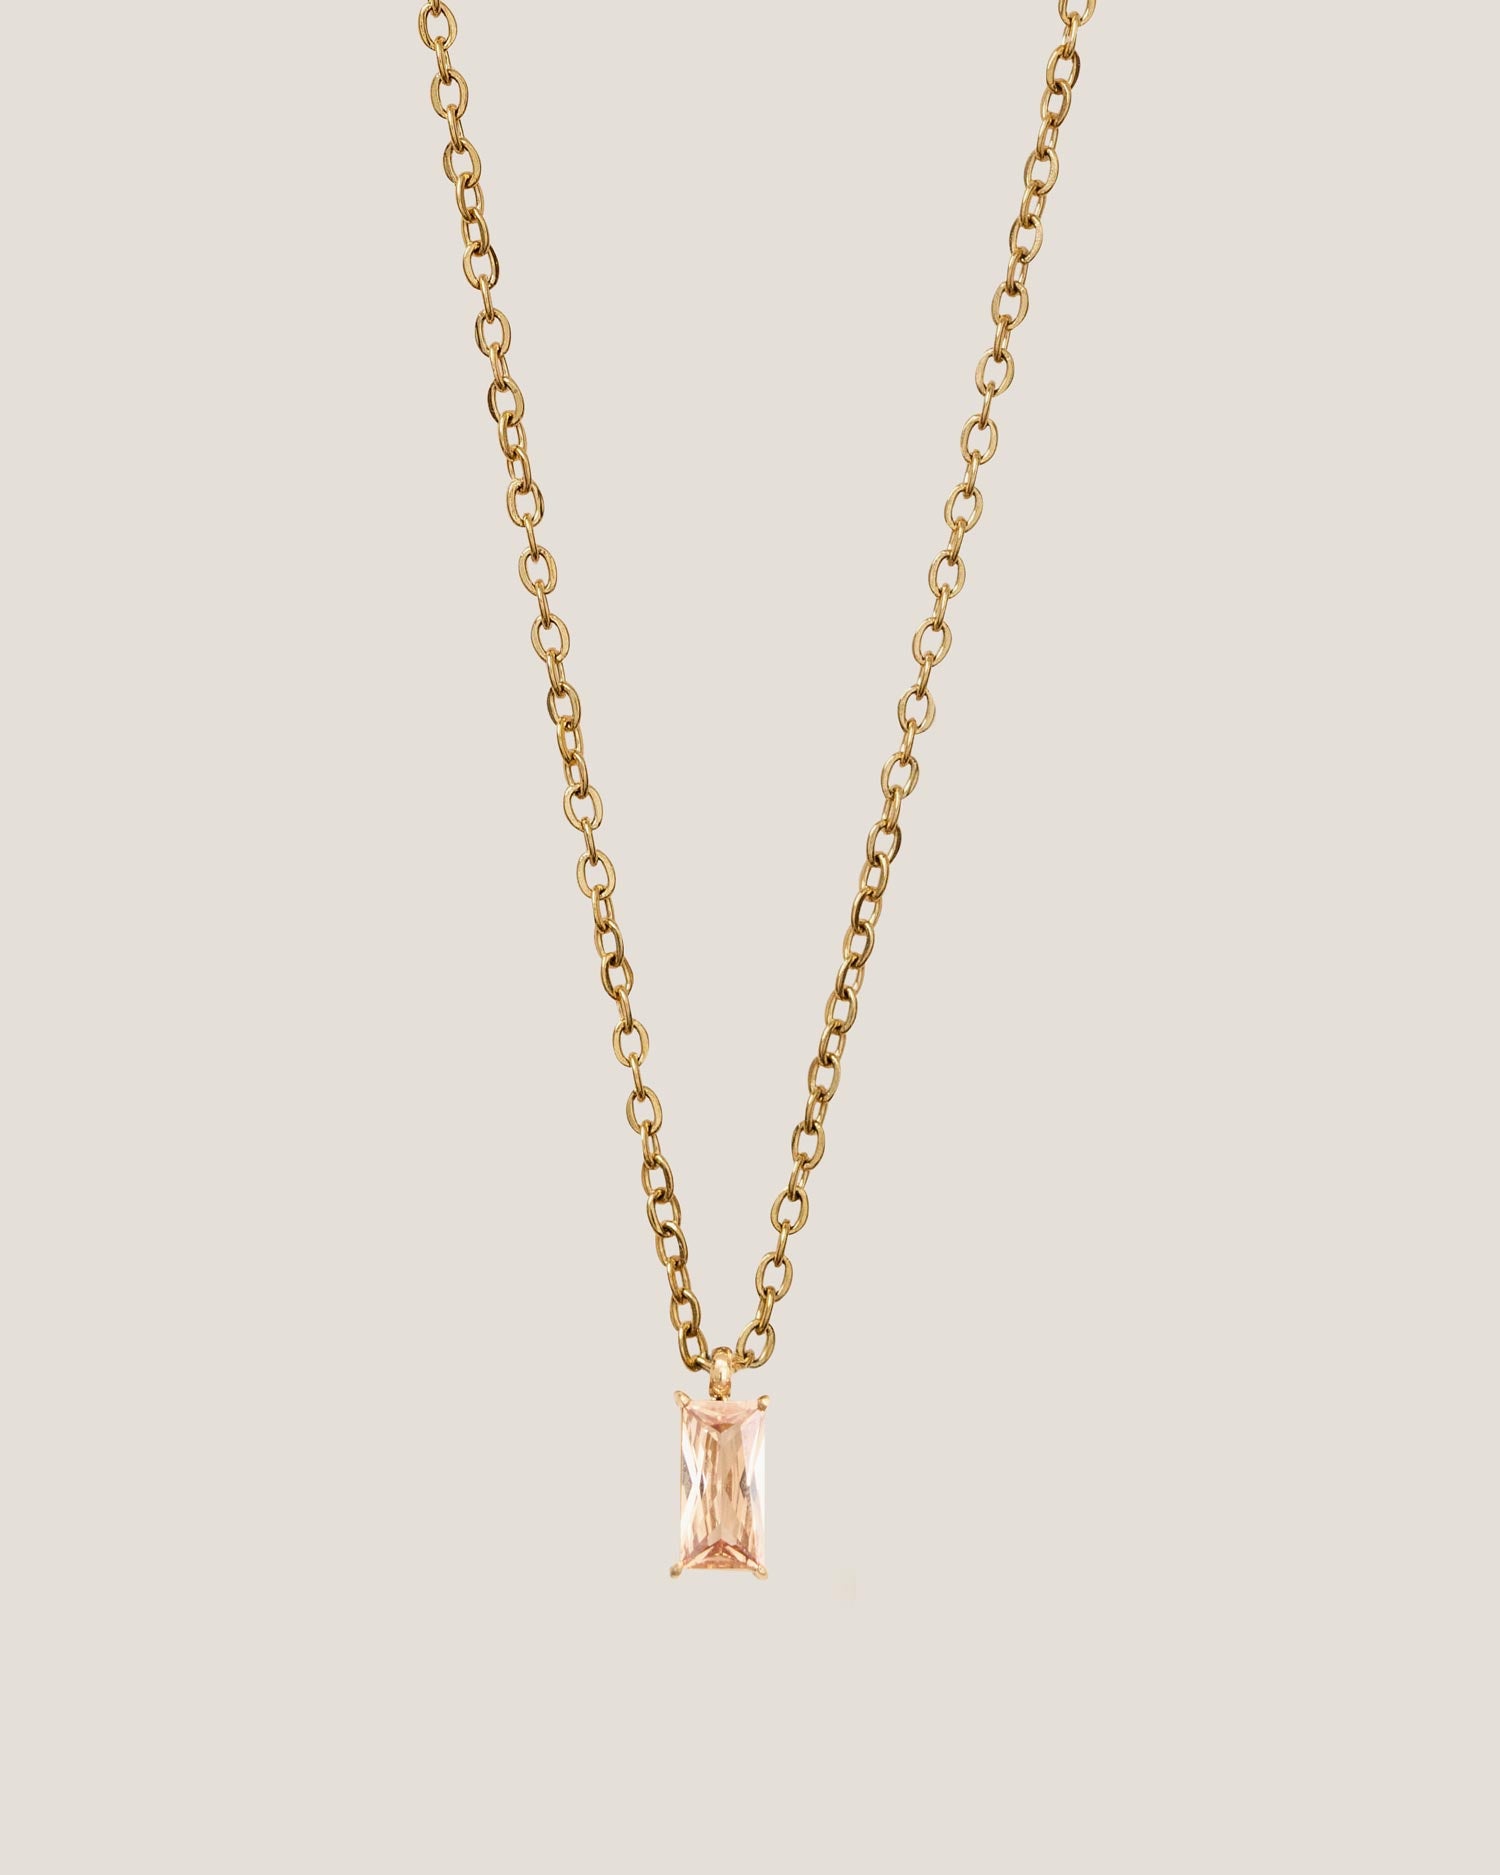 Verity Champagne Pendant Gold Necklace